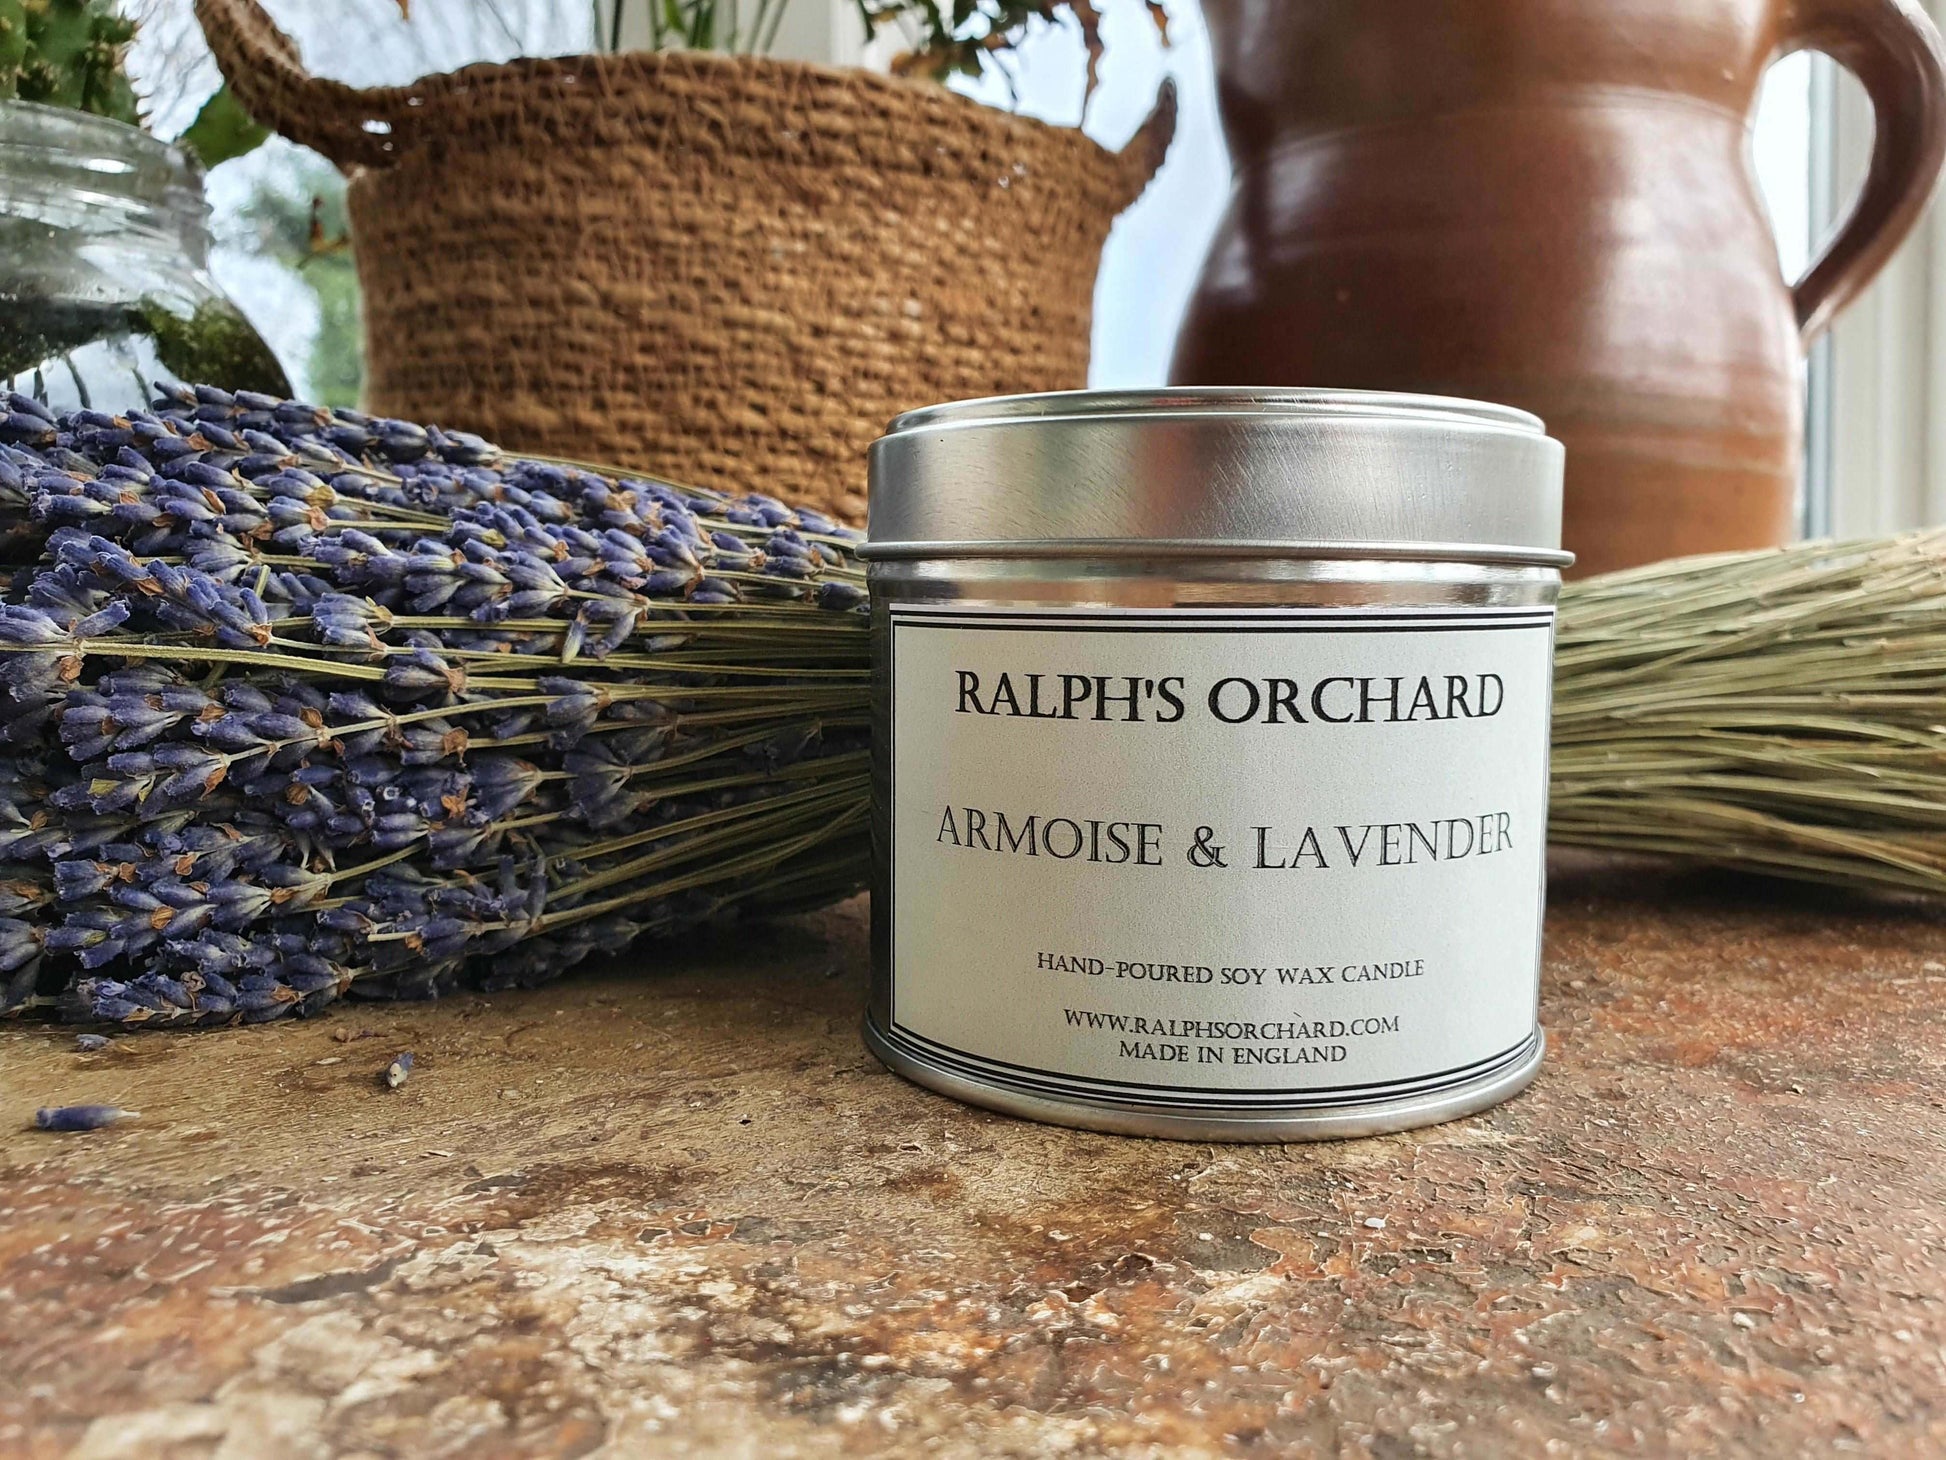 Armoise & Lavender scented soy wax candle Candles Ralph's Orchard 